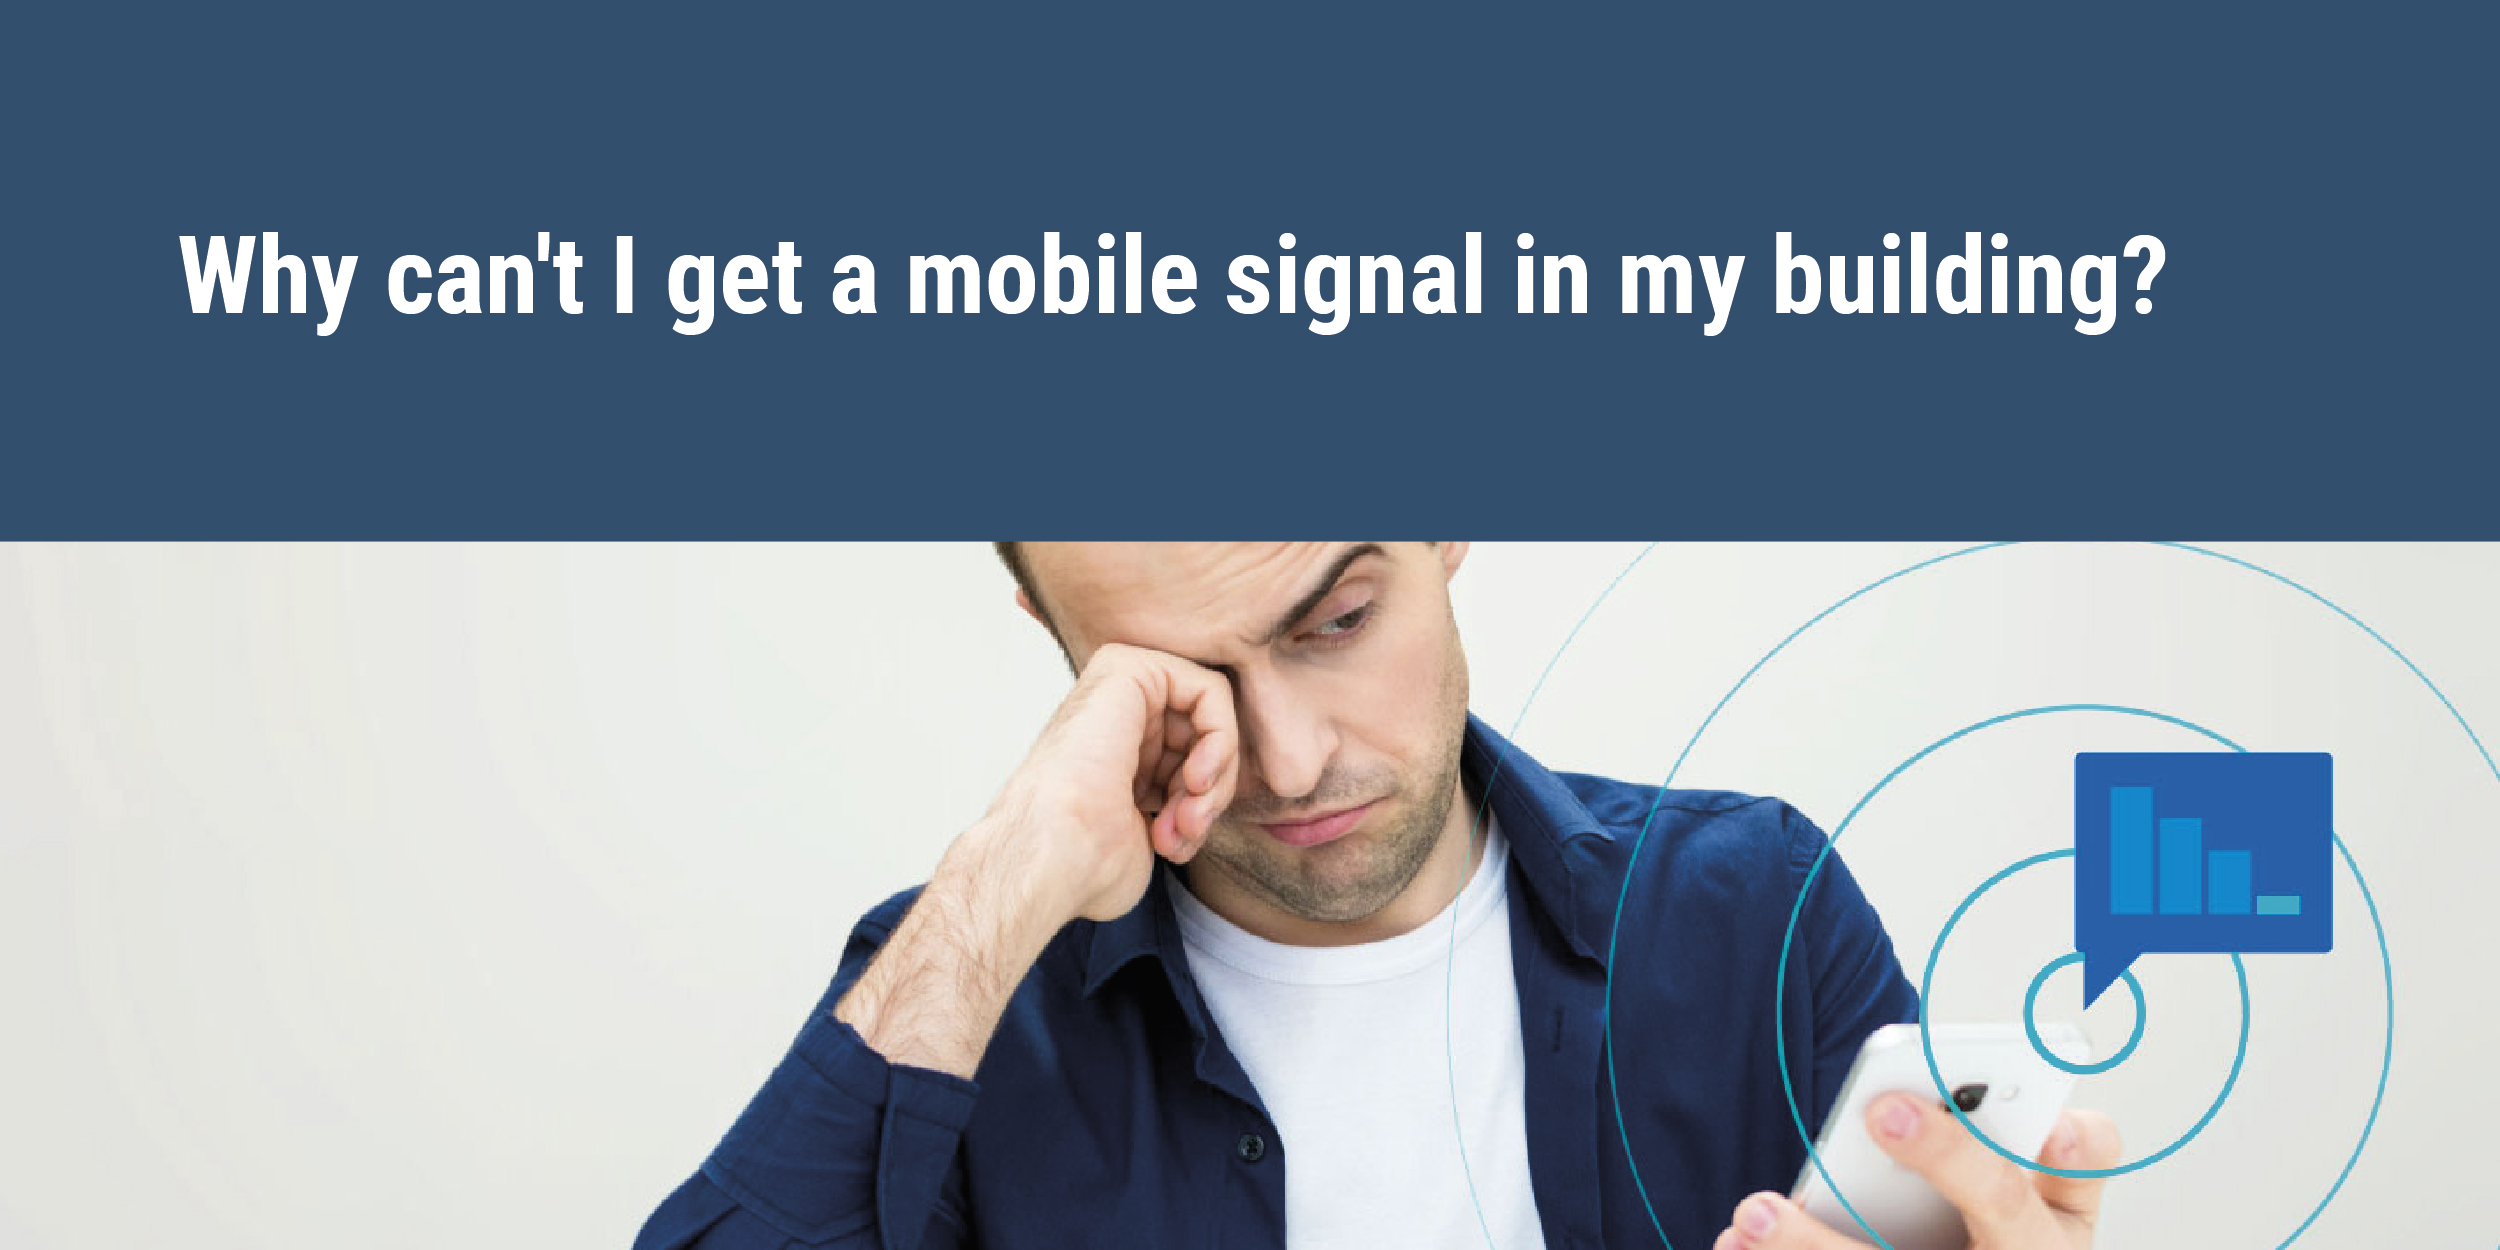 Man looking frustrated as has no mobile signal